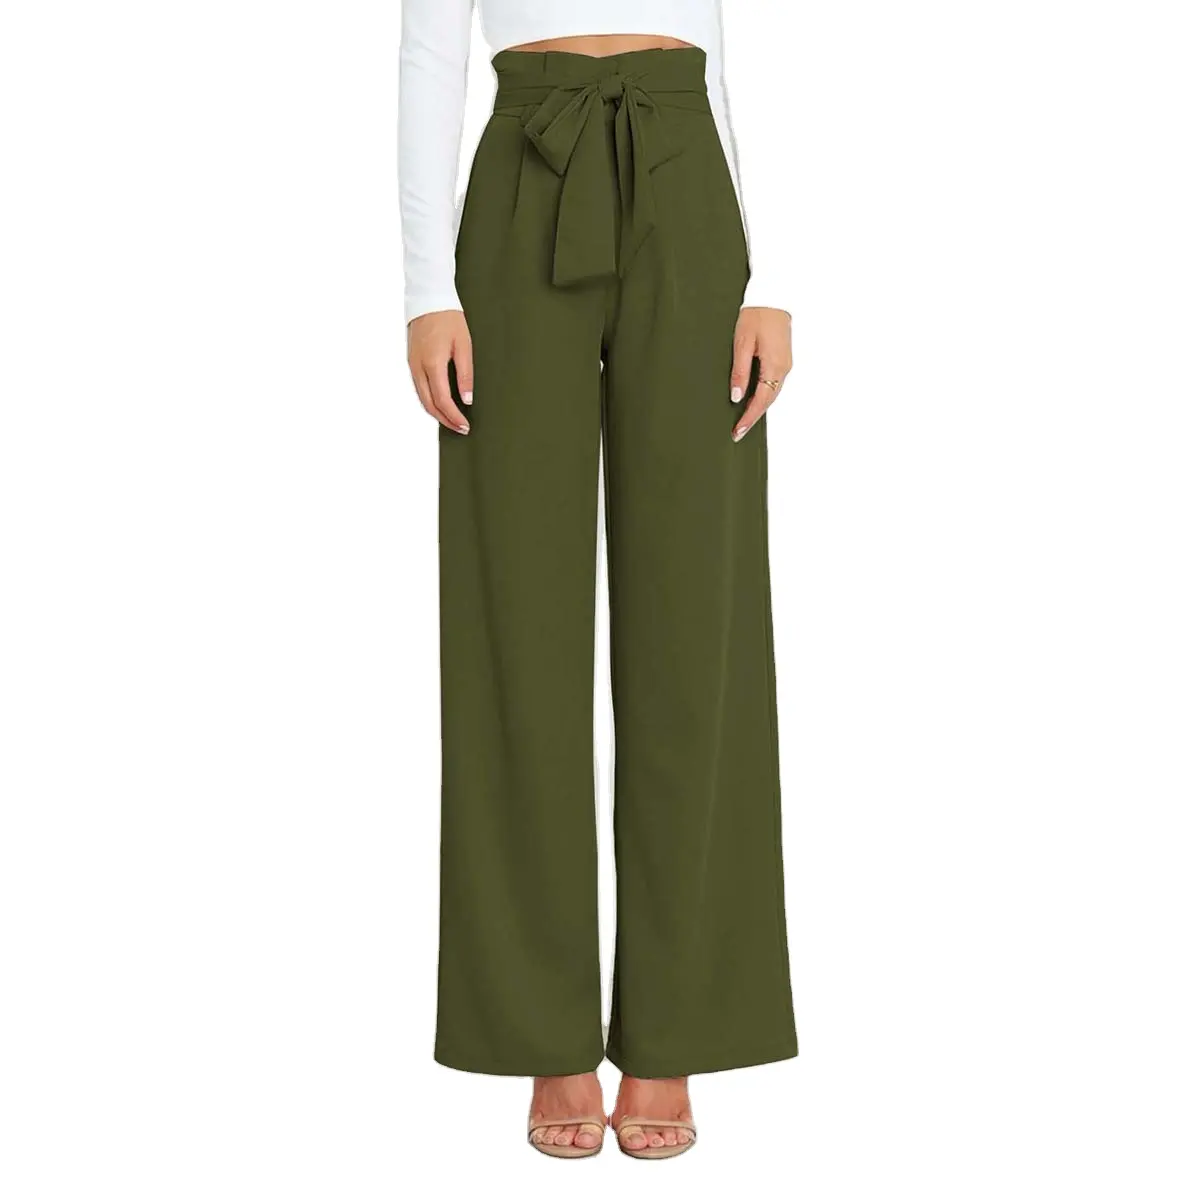 Women's Casual Solid High Waist Tie Front Office Wide Leg Pants with Pockets WPFA-002